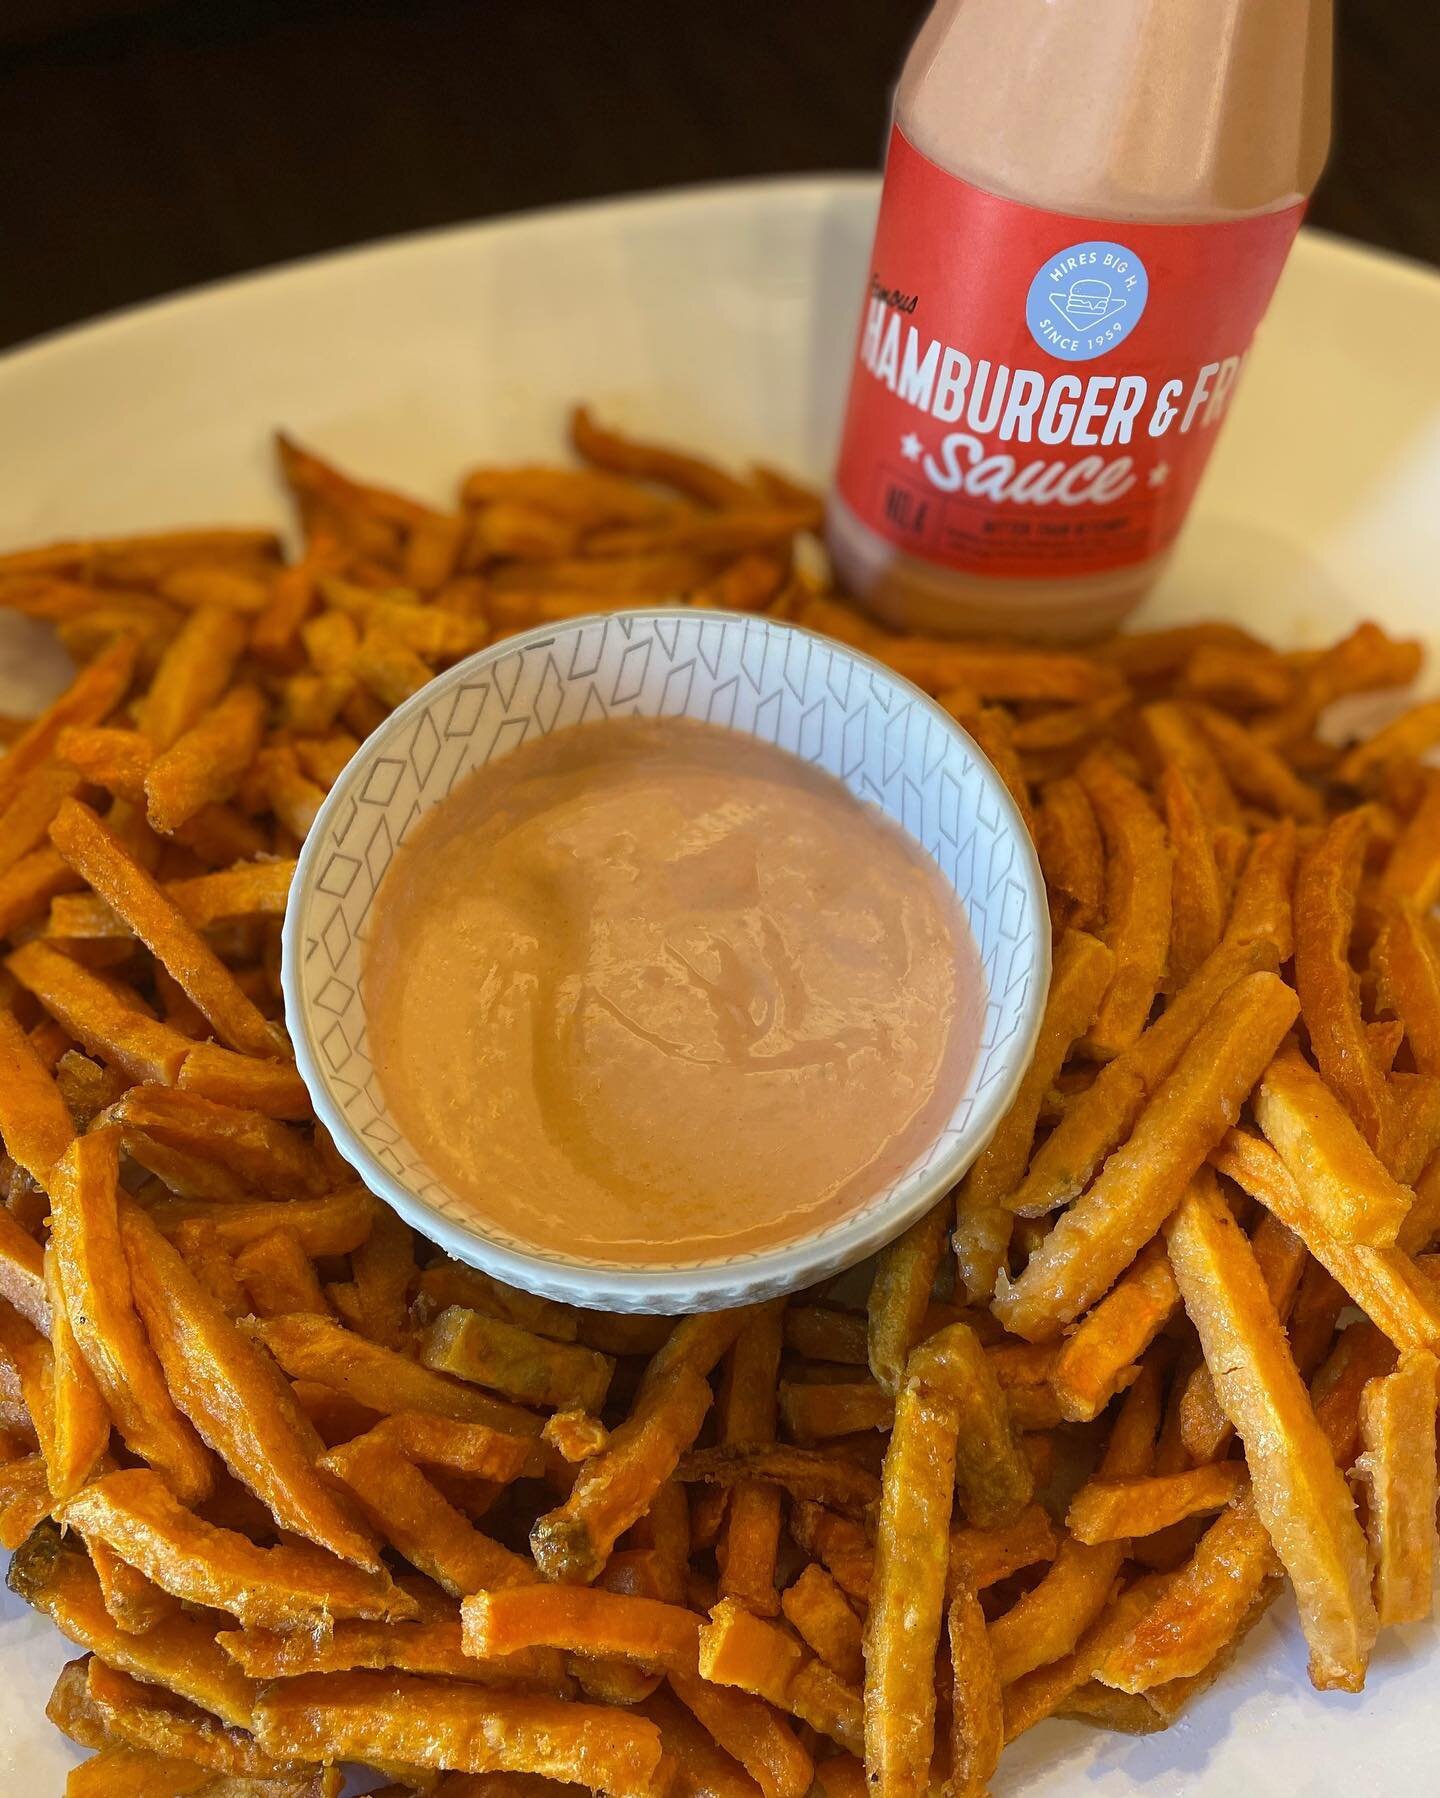 CONDIMENT DEBATE! We know Heinz caused a huge stir when they introduced Mayochup in 2018, but we&rsquo;re Utahans. We are the OG fry sauce experts. And we want to hear from you. Do you use fry sauce or ketchup at the dinner table? Does anyone just us